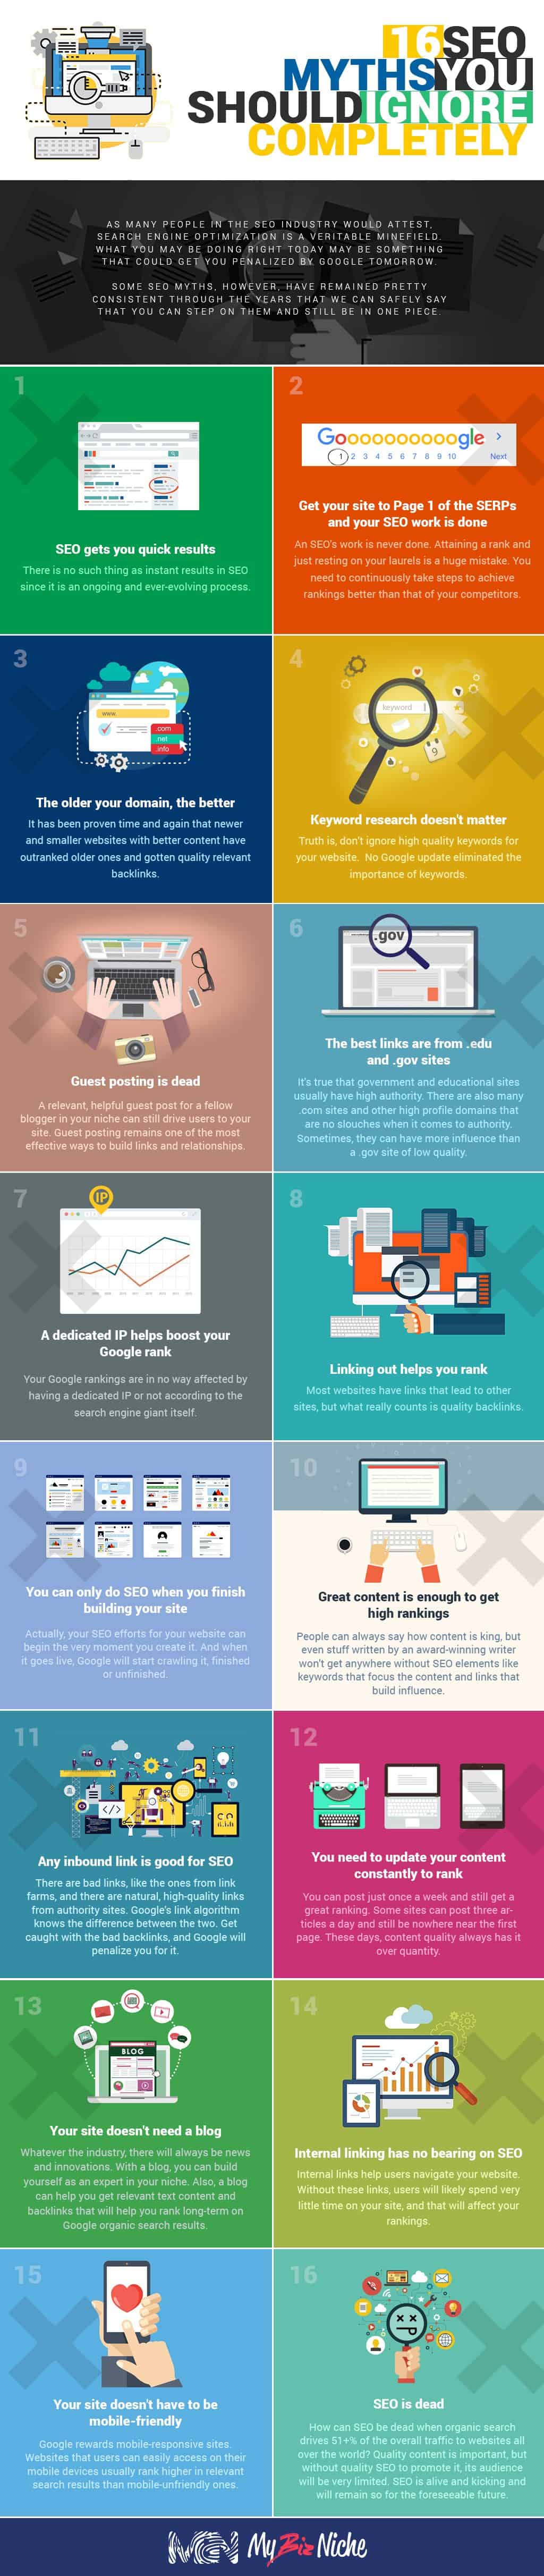 infographie 16 mythes seo scaled